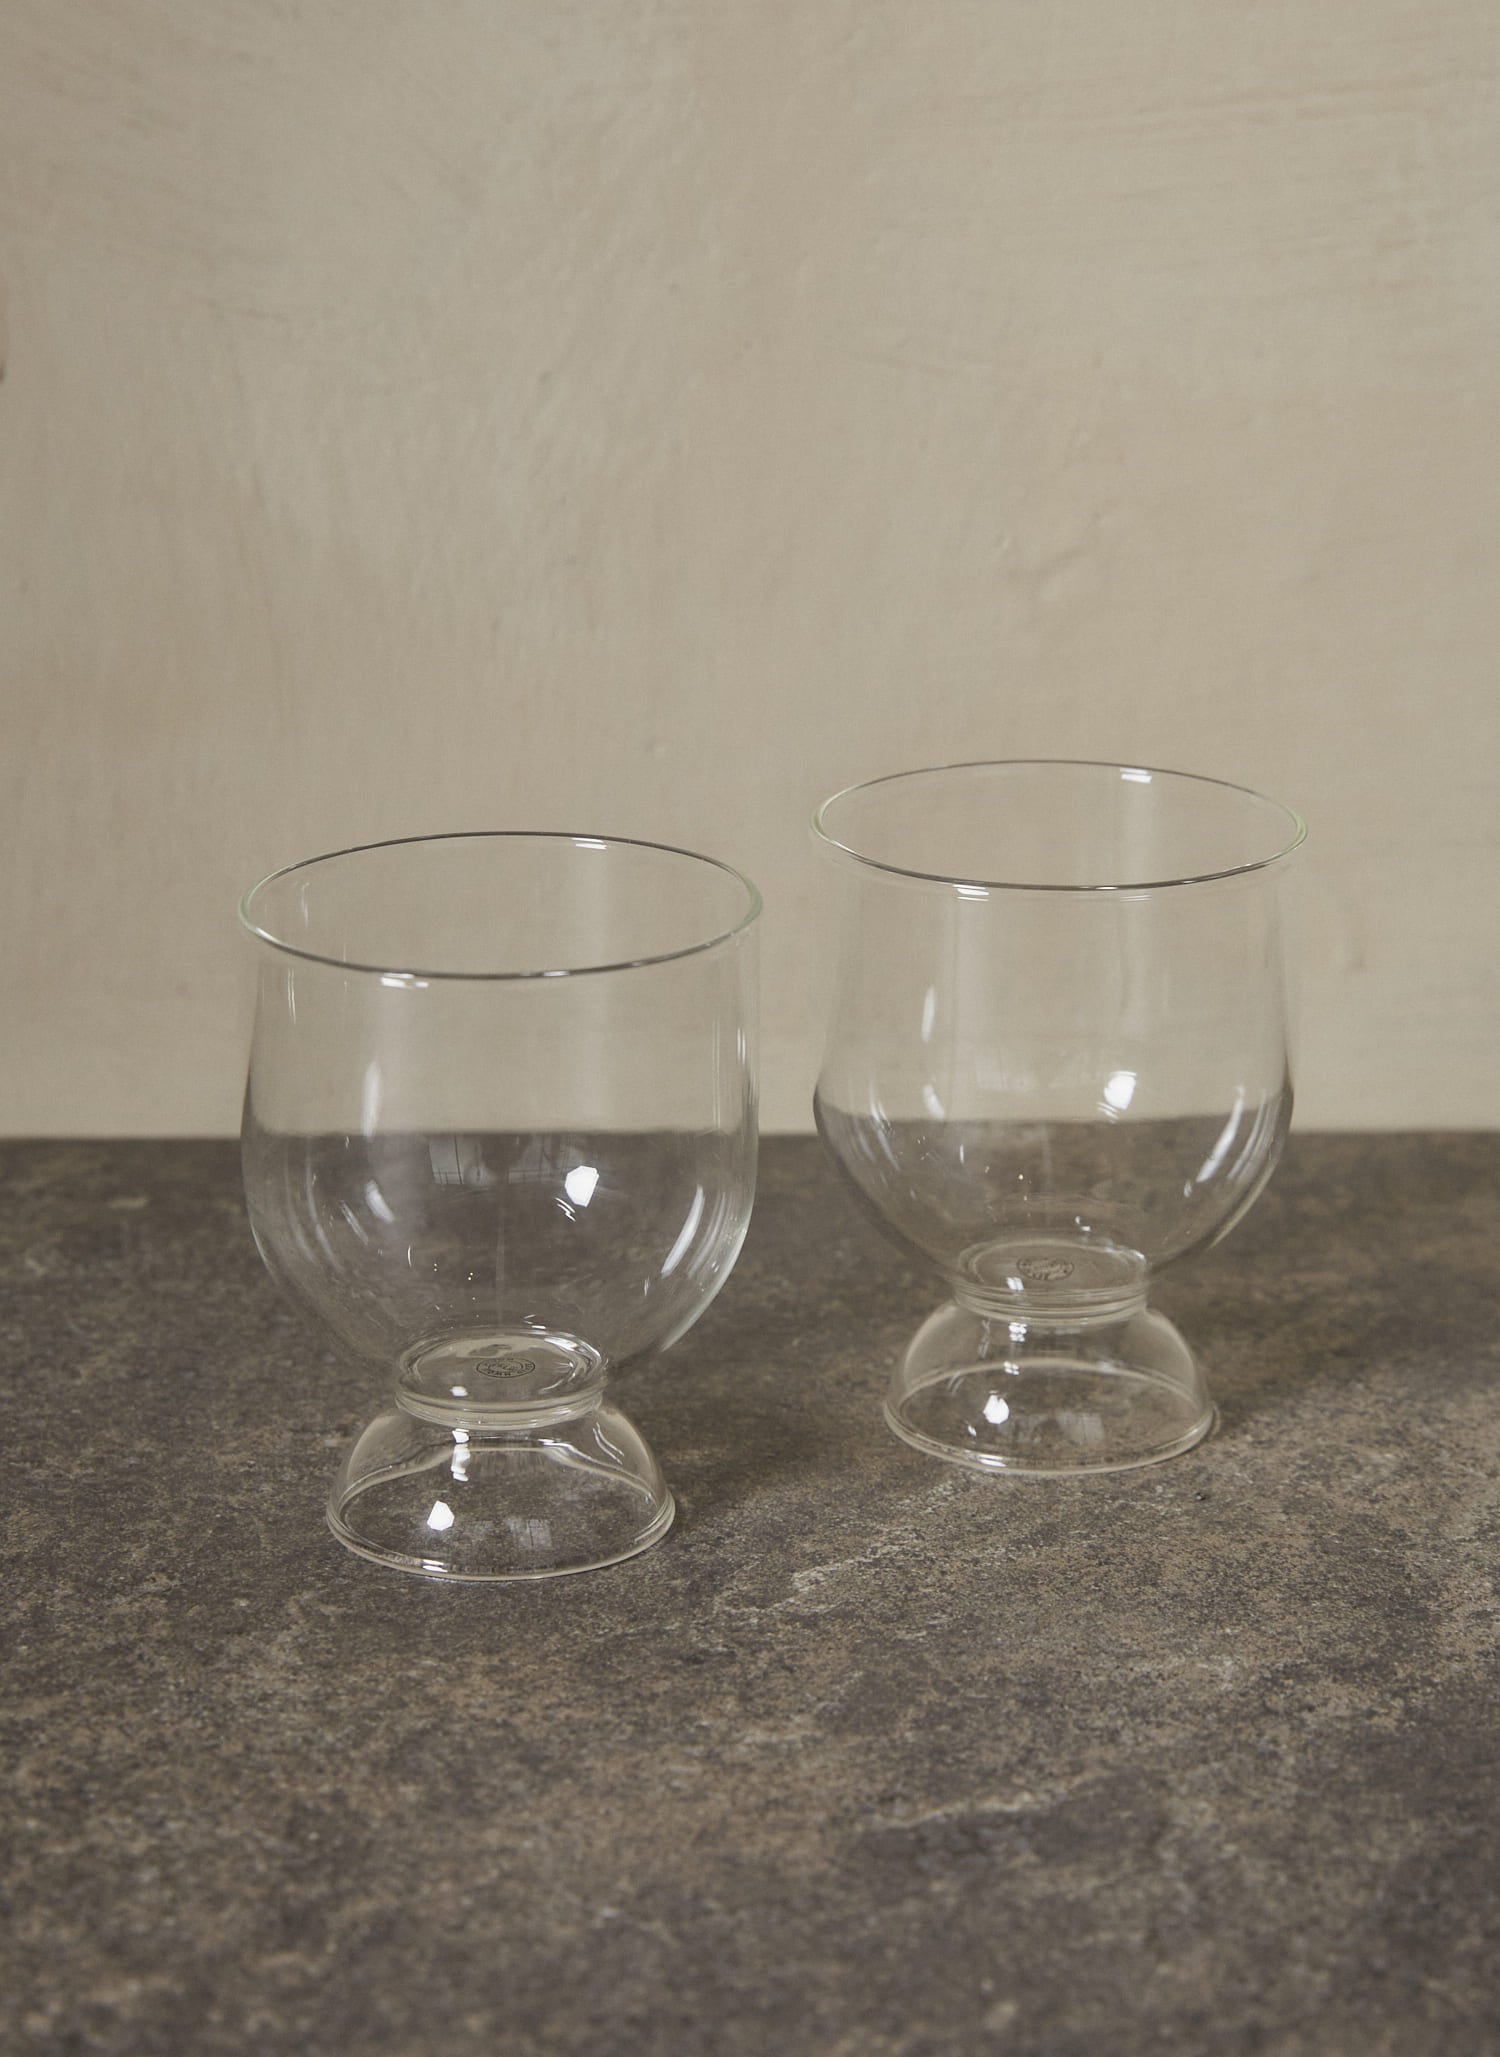 Still Glasses Set of 2. Rooted in simplicity and balance, this pair of gently rounded mouth-blown glasses feature an hourglass shape, making them ideal for wine as well as water.